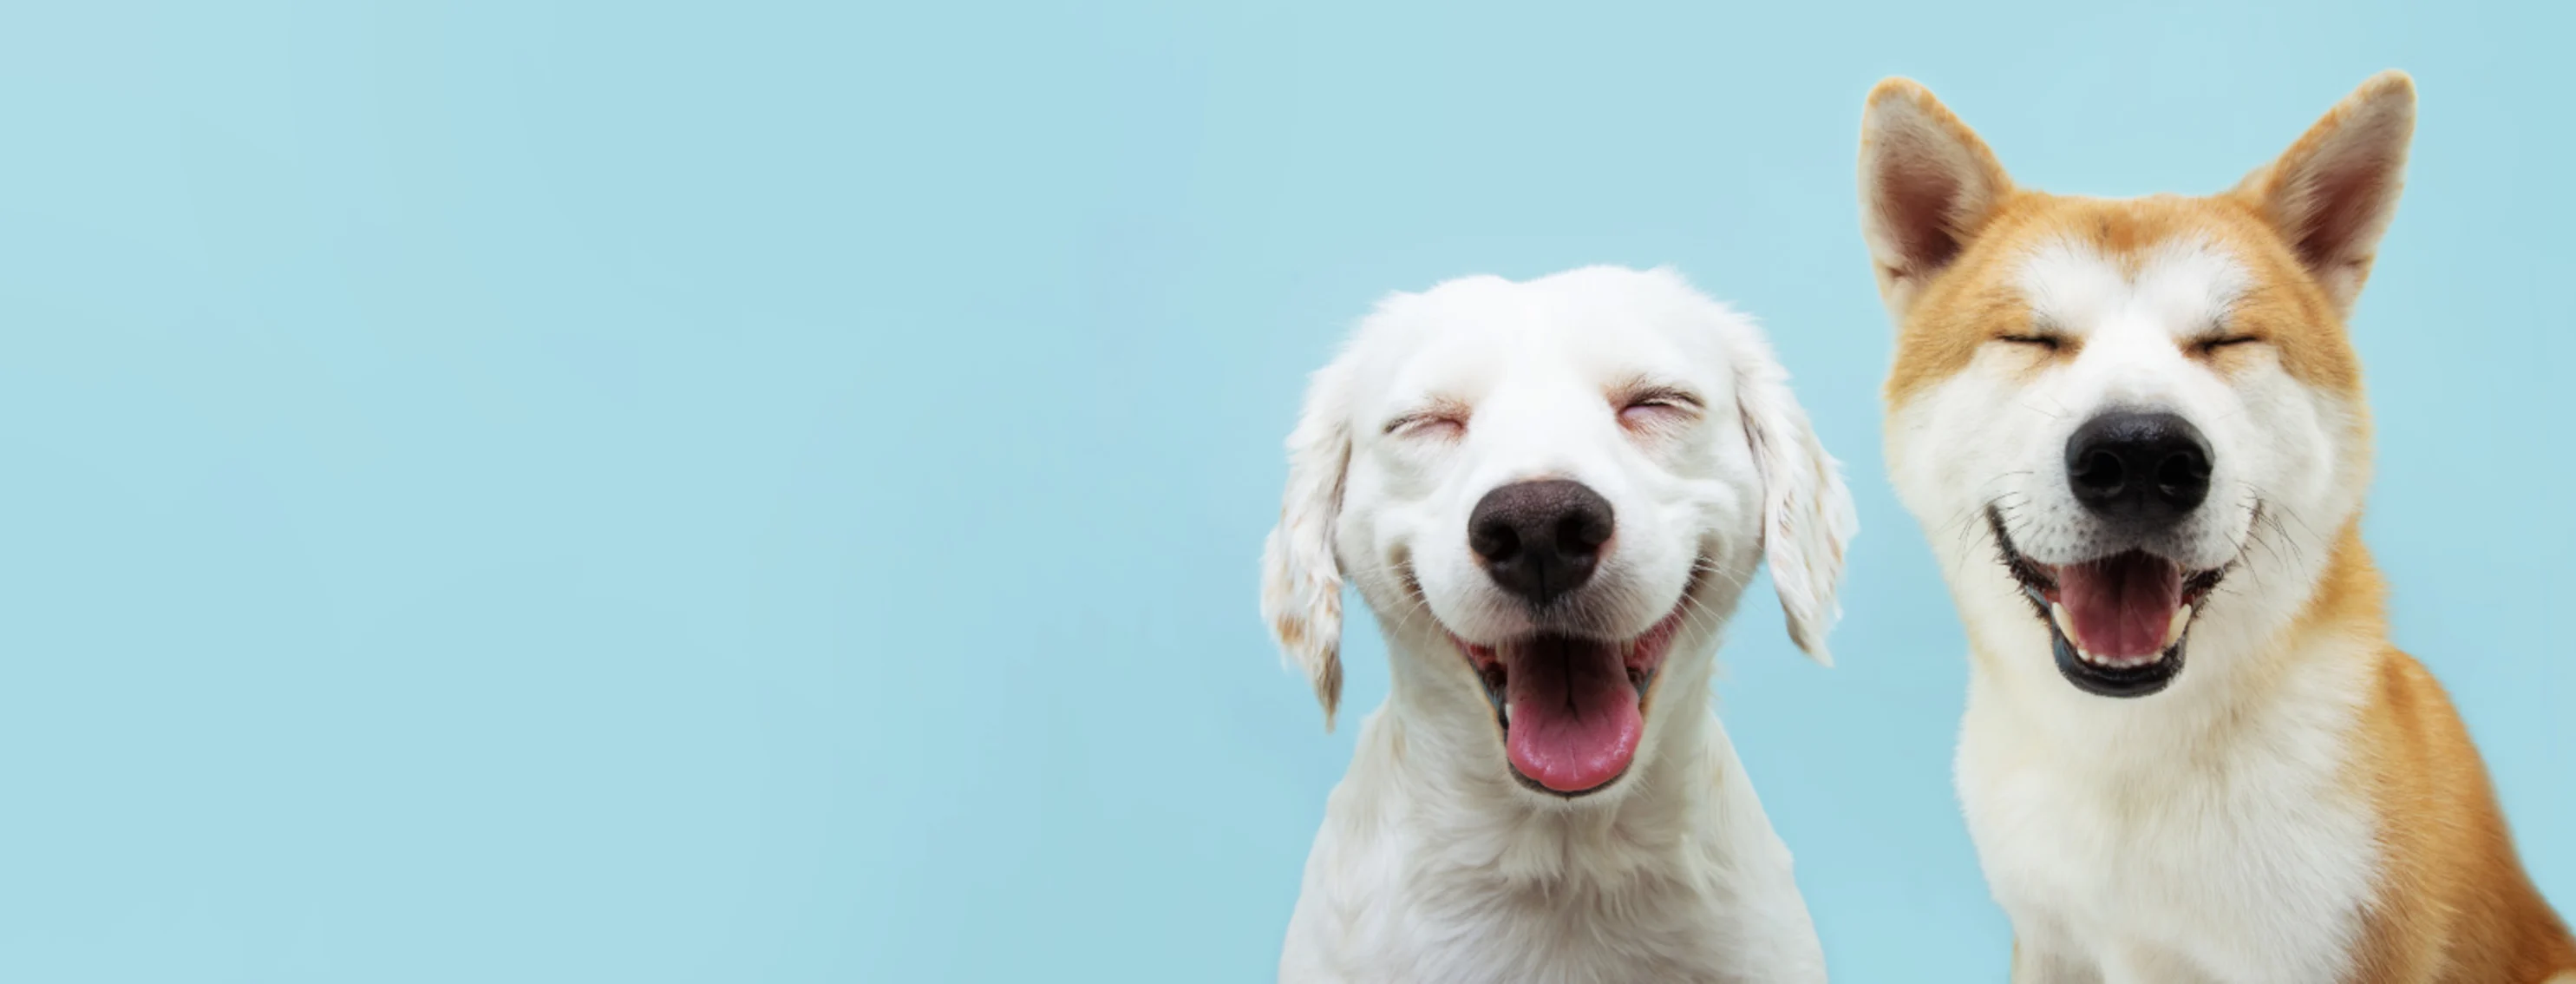 Two Happy Dogs Smiling with Closed Eyes with a Light Blue Background